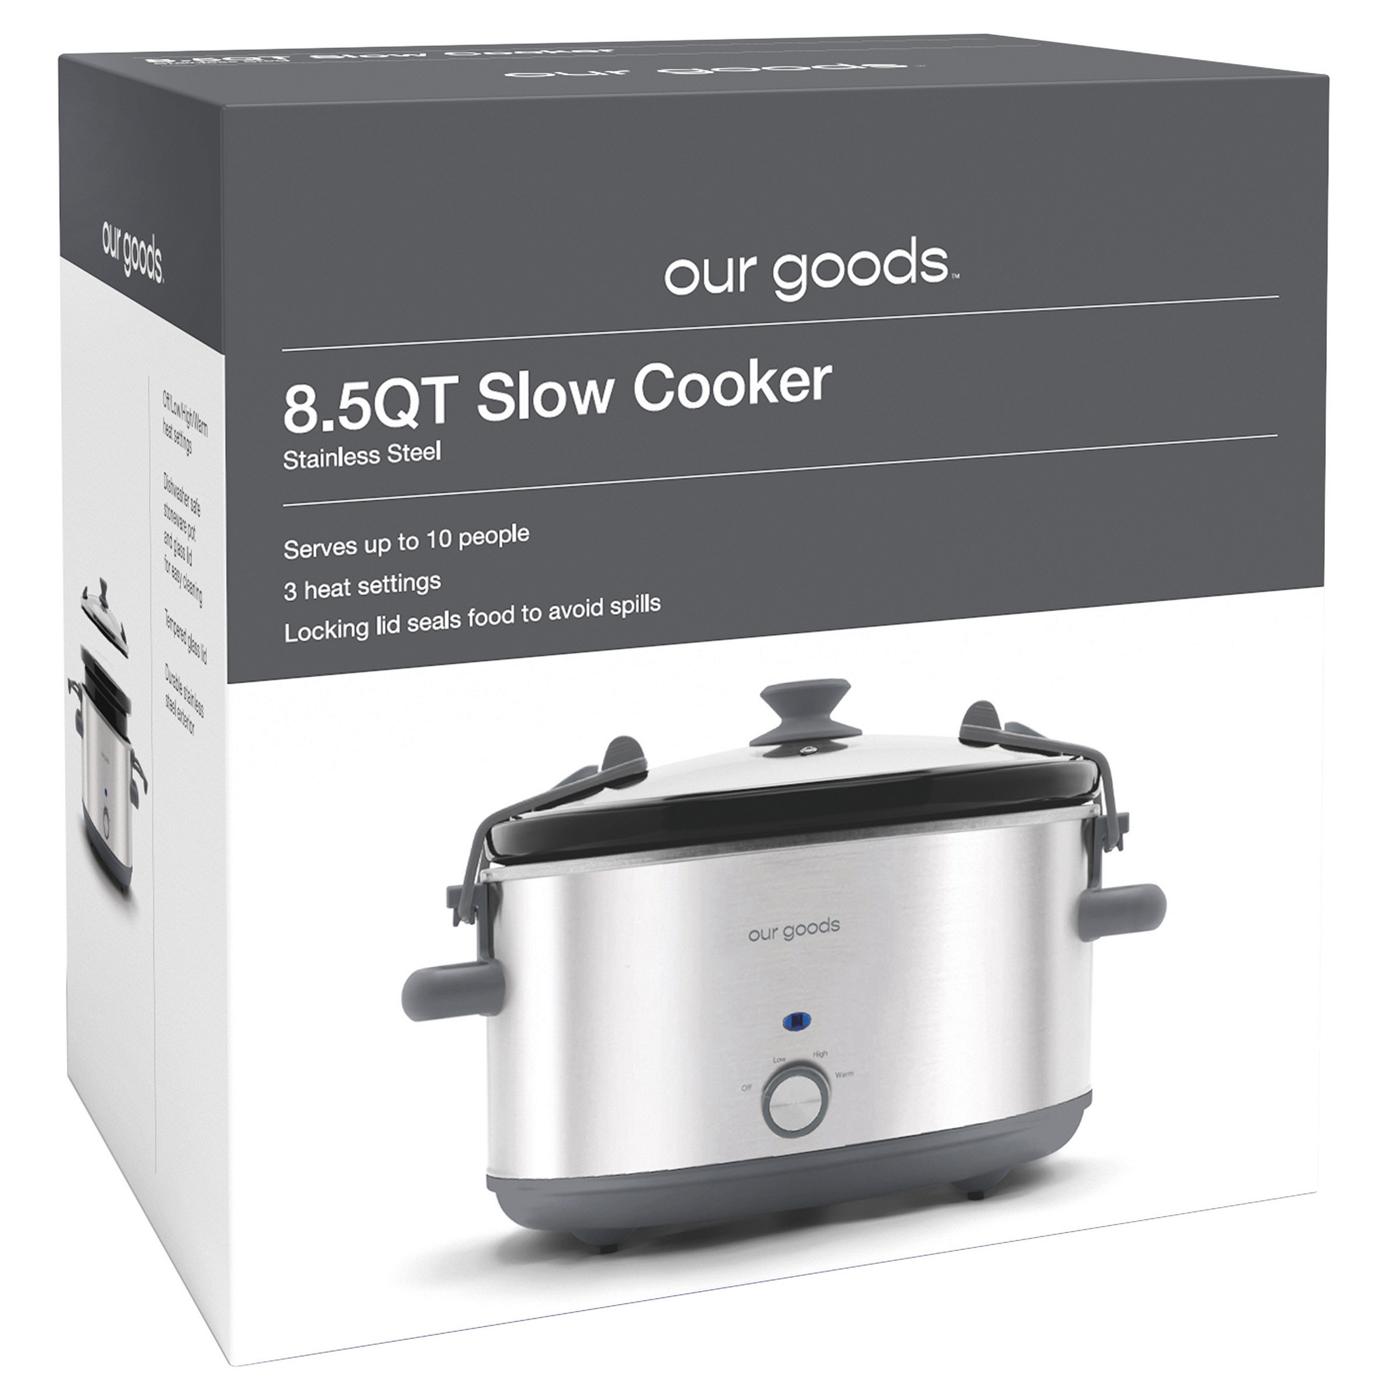 our goods Slow Cooker - Stainless Steel; image 3 of 3